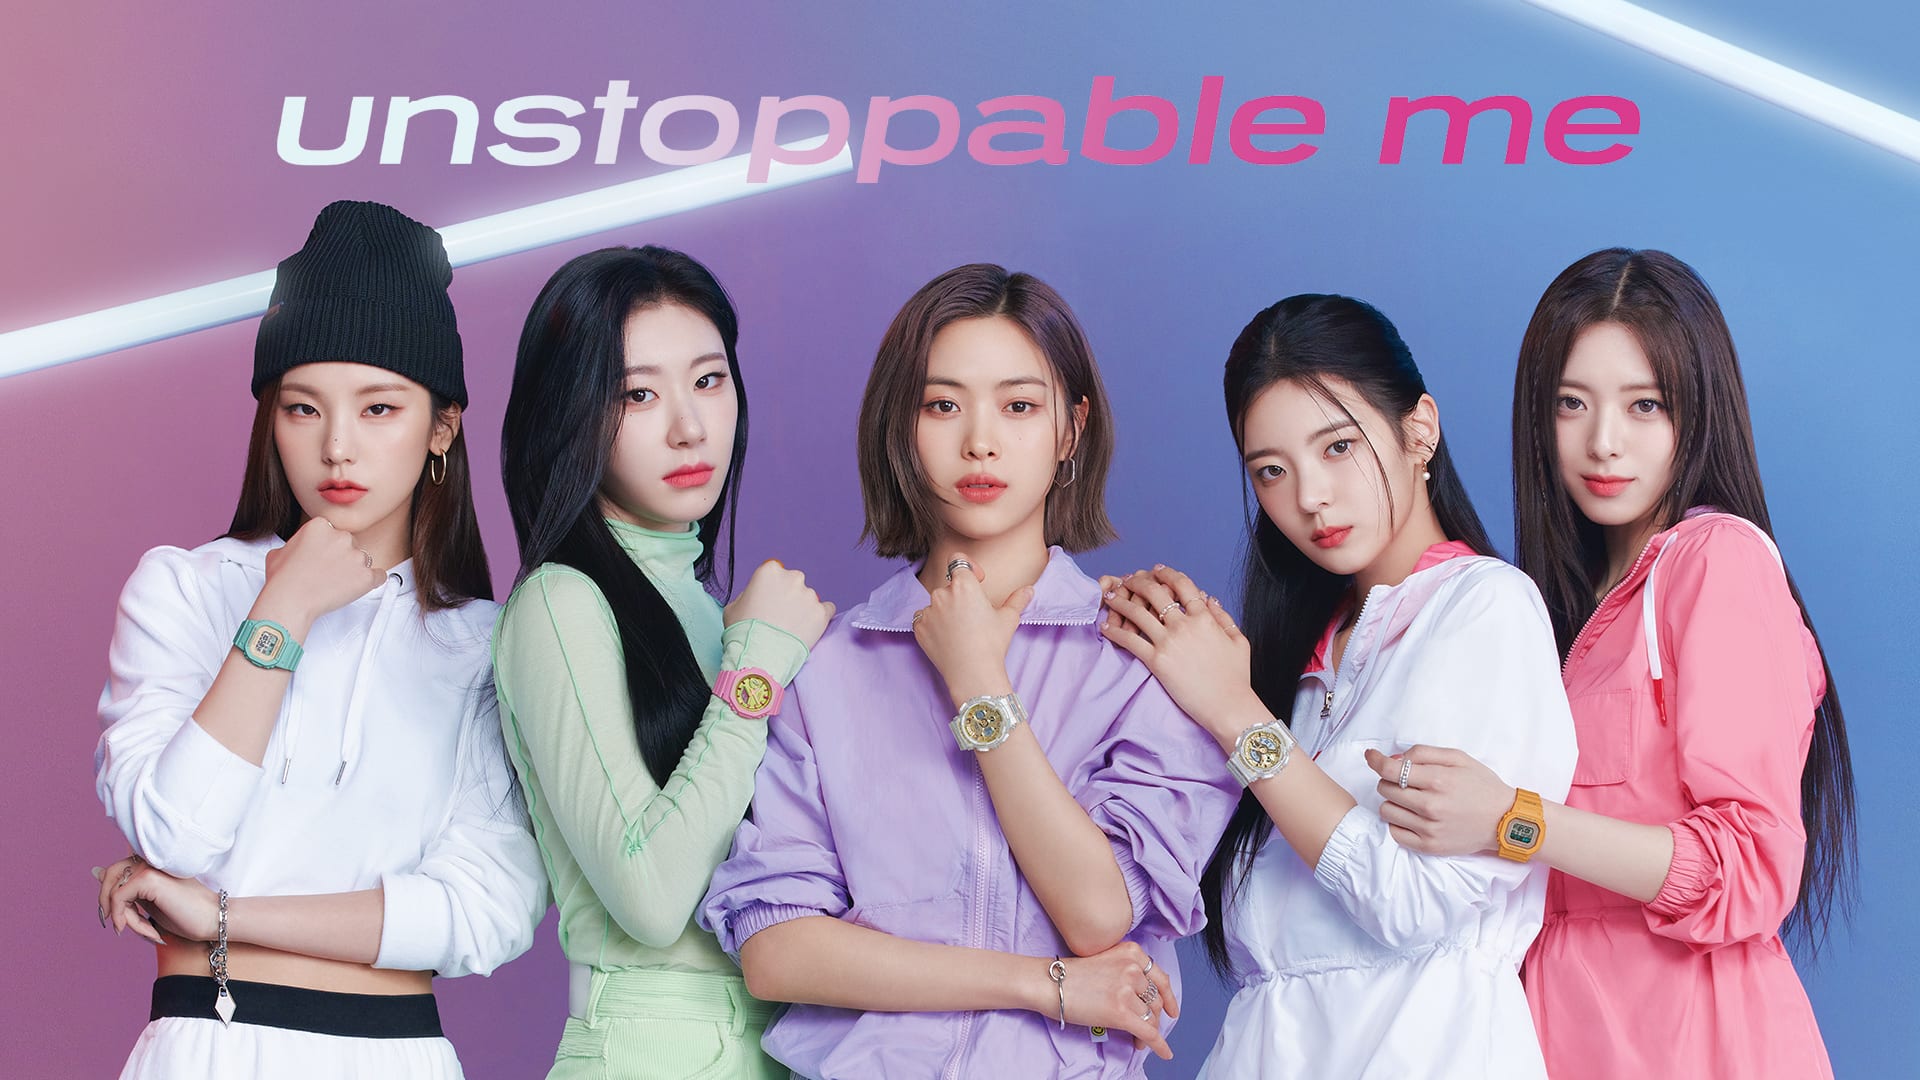 Unstoppable me, group of ITZY band members
Open left rail for additional features